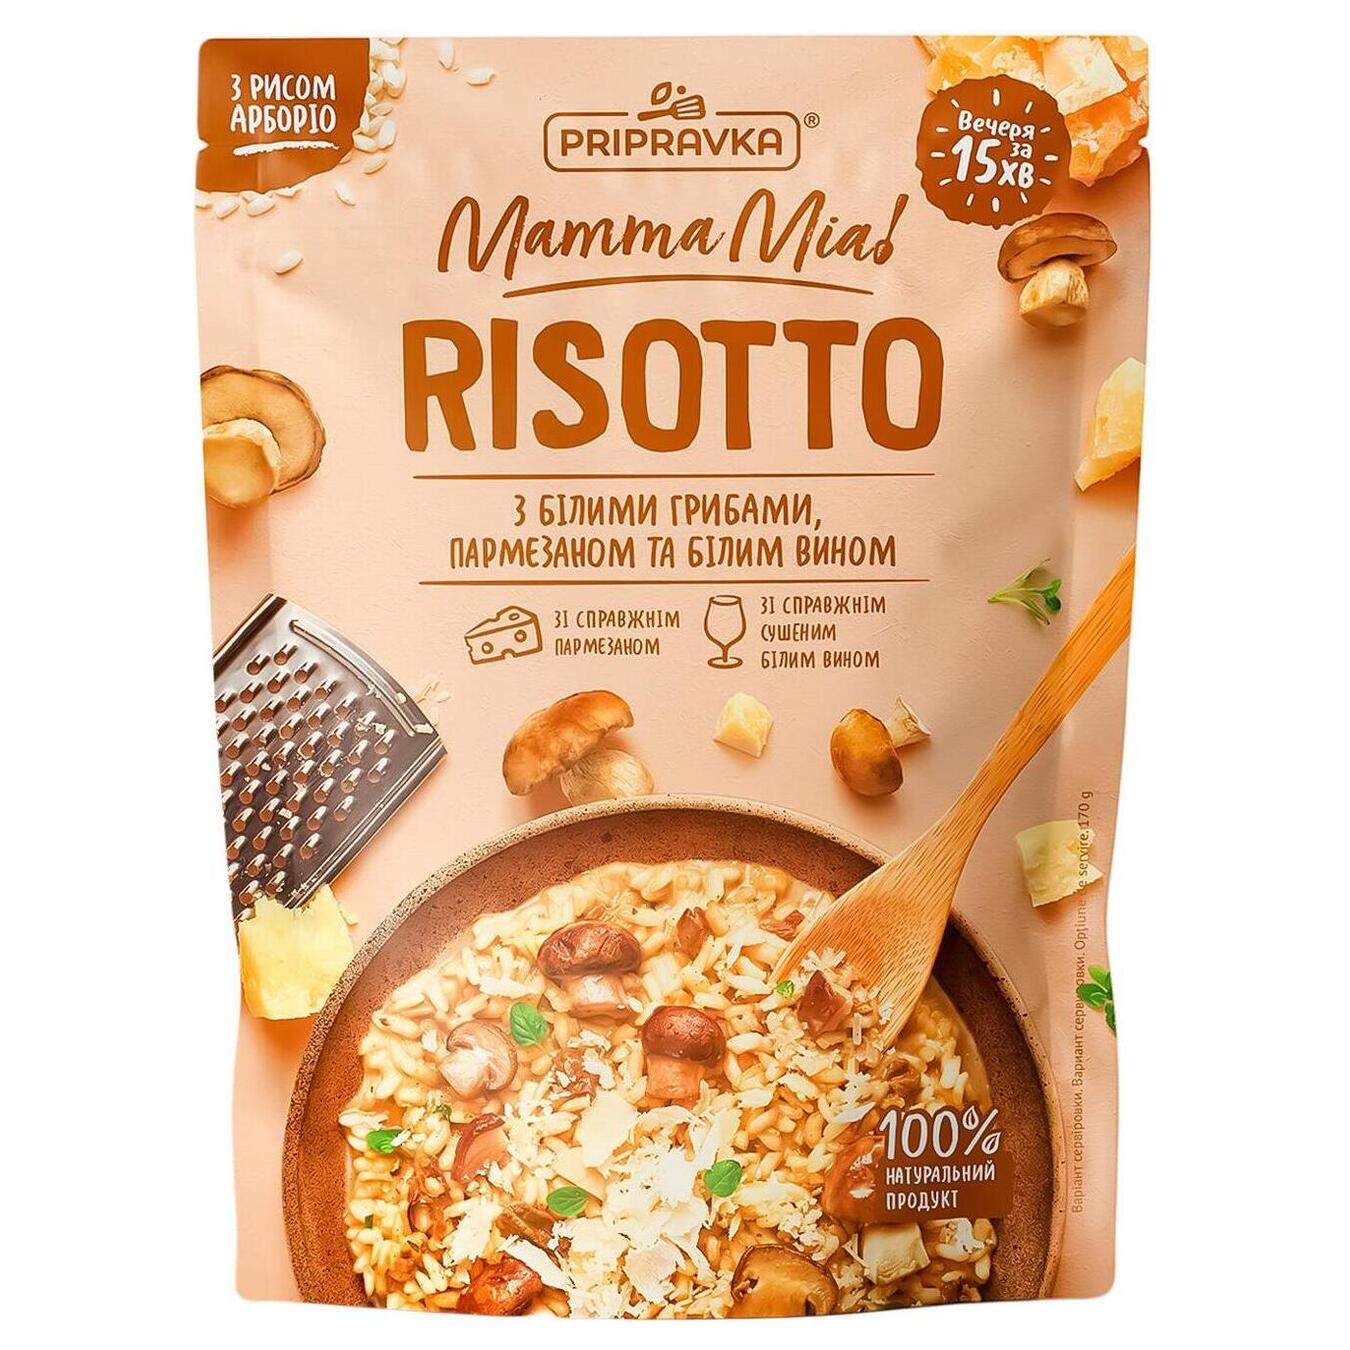 Risotto seasoning mixture with white mushrooms, parmesan and white wine, natural 170g